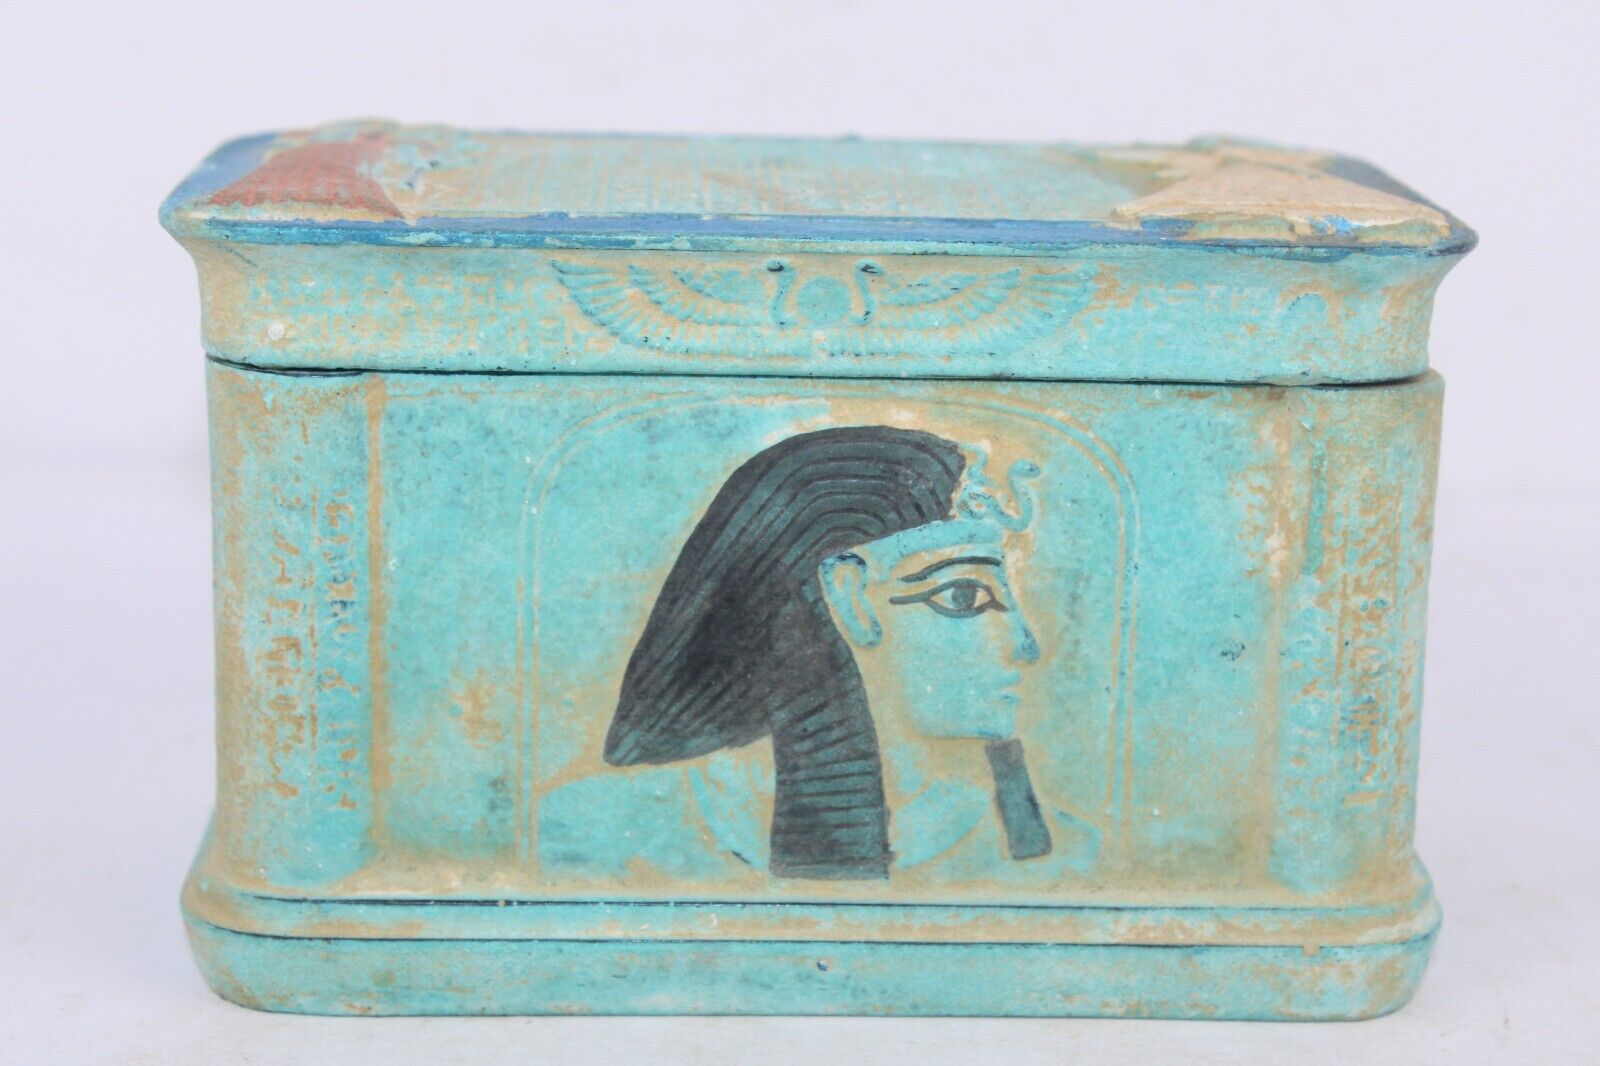 ANCIENT EGYPTIAN OLD PHARAONIC KINGDON TUT and Queen with Horus Jewelery Box